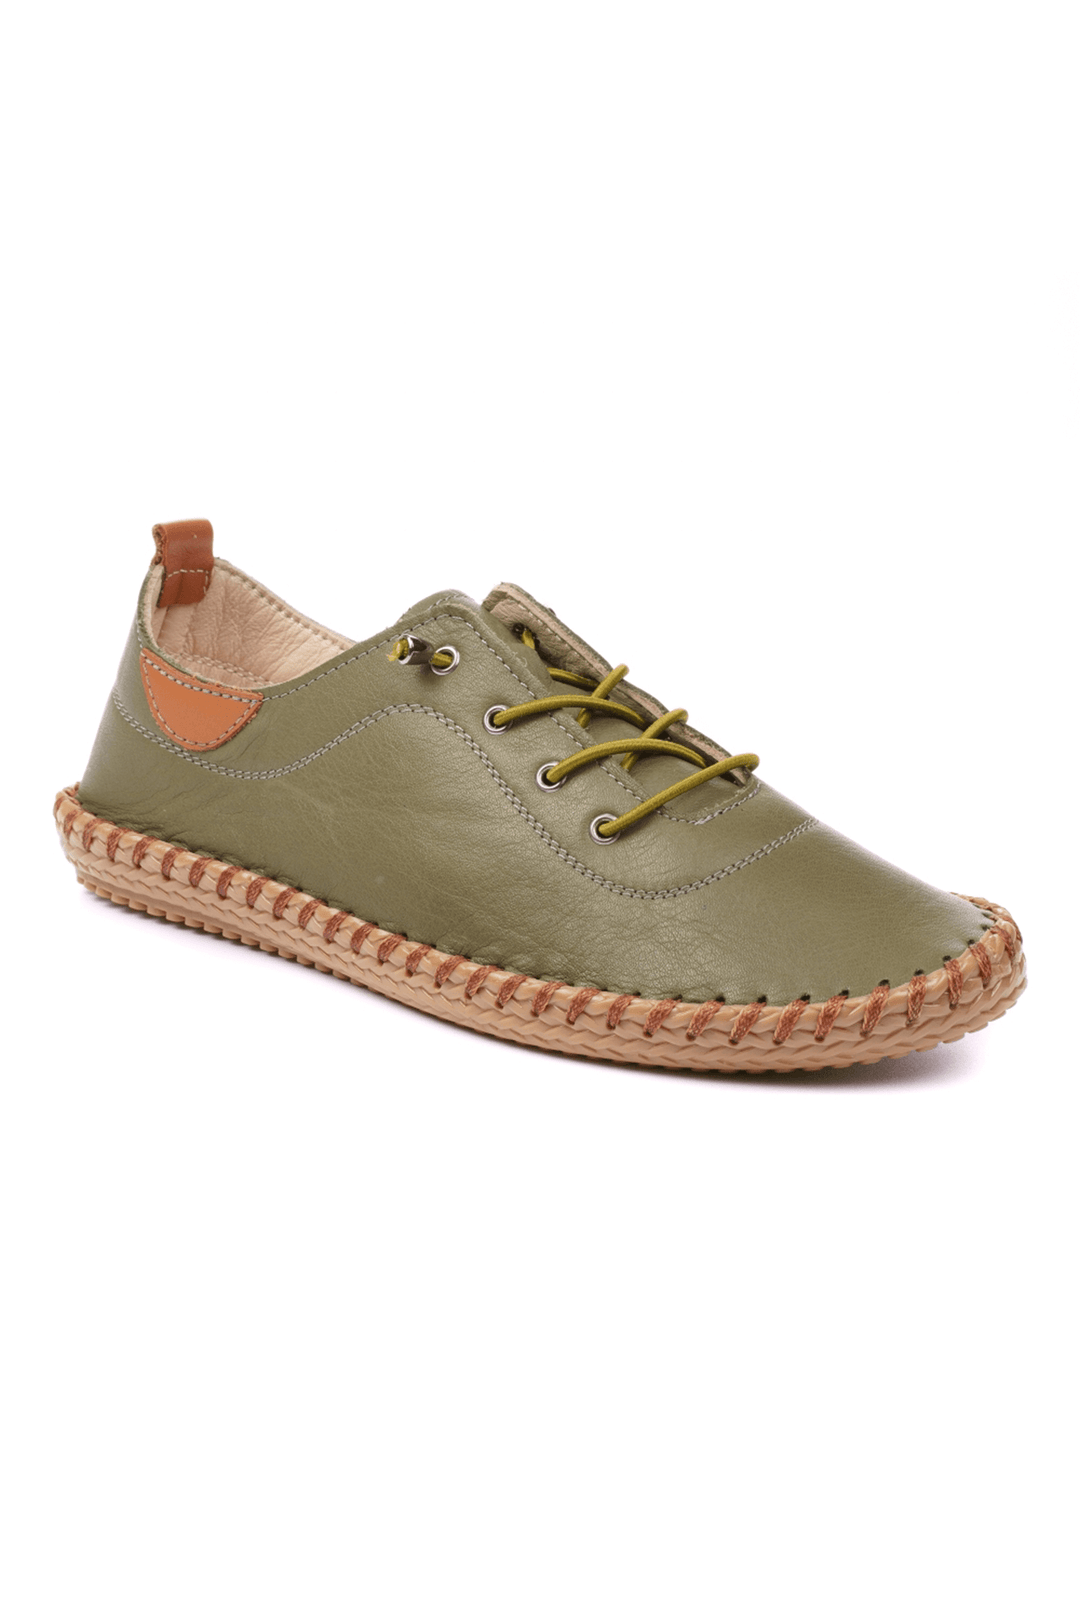 Lunar Whitstable FLG019 Leather Green Plimsoll - Shirley Allum Boutique